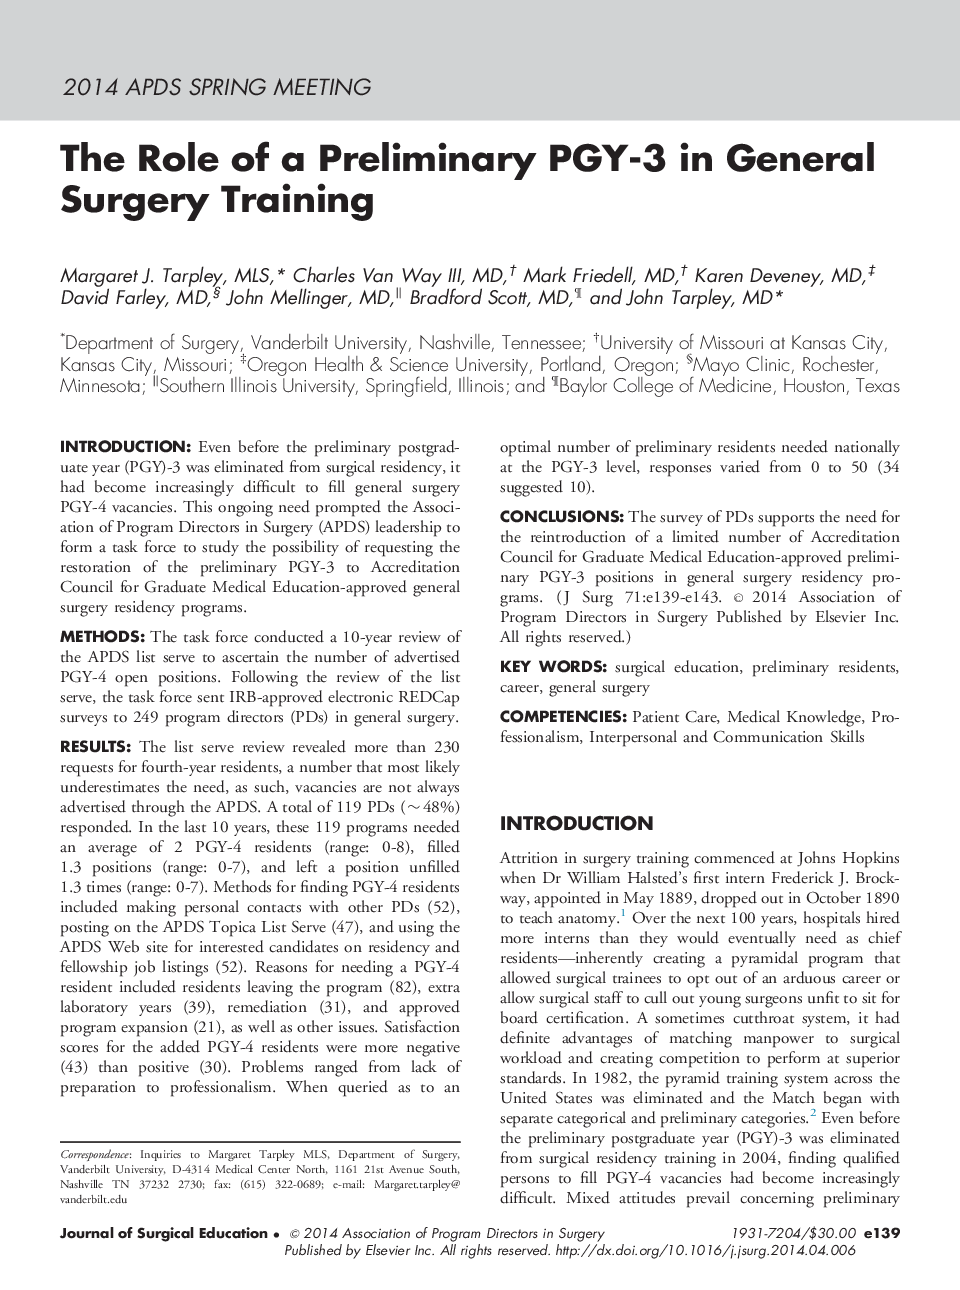 The Role of a Preliminary PGY-3 in General Surgery Training